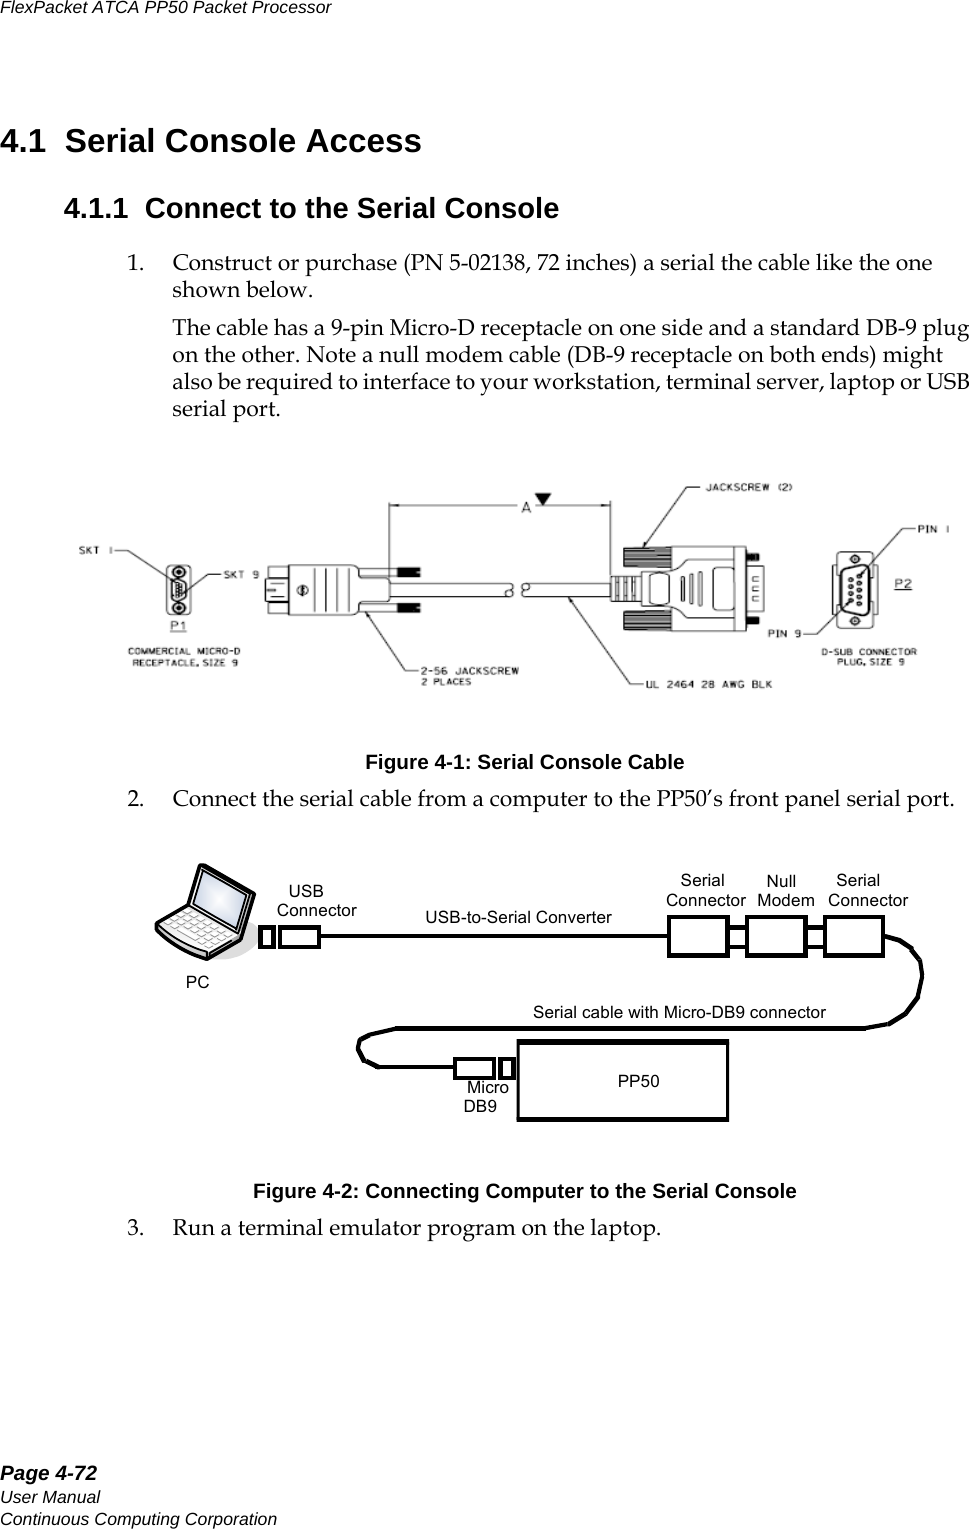 Page 4-72User ManualContinuous Computing CorporationFlexPacket ATCA PP50 Packet Processor     Preliminary4.1  Serial Console Access4.1.1  Connect to the Serial Console1. Construct or purchase (PN 5-02138, 72 inches) a serial the cable like the one shown below.The cable has a 9-pin Micro-D receptacle on one side and a standard DB-9 plug on the other. Note a null modem cable (DB-9 receptacle on both ends) might also be required to interface to your workstation, terminal server, laptop or USB serial port.Figure 4-1: Serial Console Cable2. Connect the serial cable from a computer to the PP50’s front panel serial port. Figure 4-2: Connecting Computer to the Serial Console3. Run a terminal emulator program on the laptop.USB-to-Serial ConverterNull ModemMicro DB9SerialConnectorUSBConnectorSerialConnectorSerial cable with Micro-DB9 connectorPP50PC